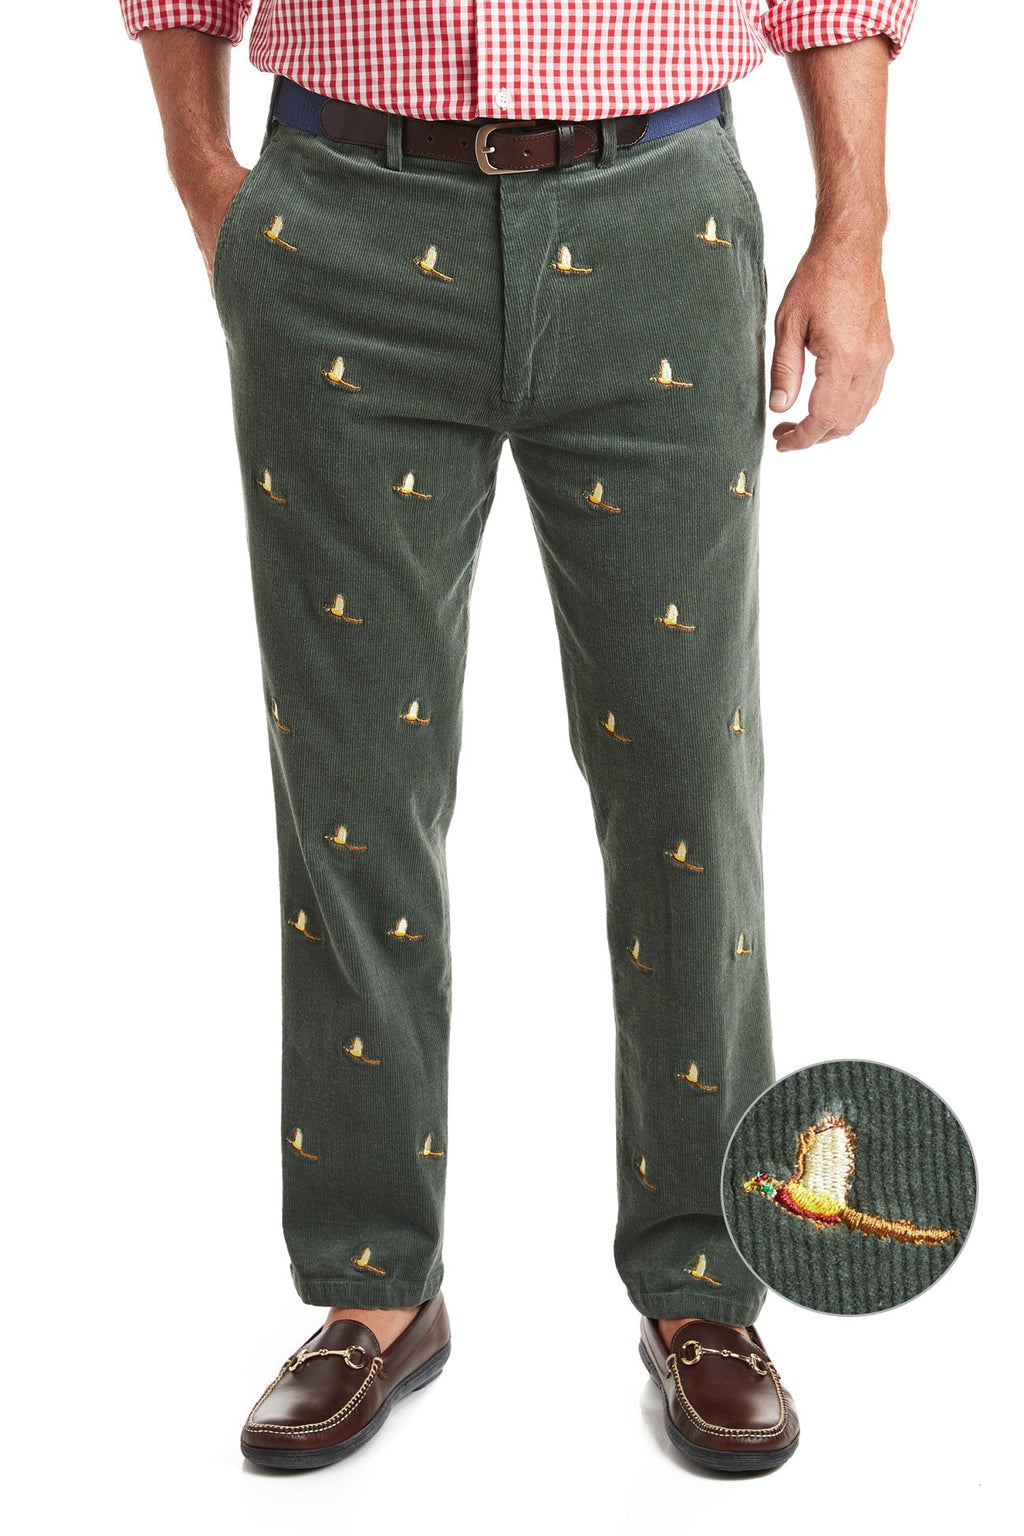 Beachcomber Corduroy Pant Olive with Pheasant MENS EMBROIDERED PANTS ...